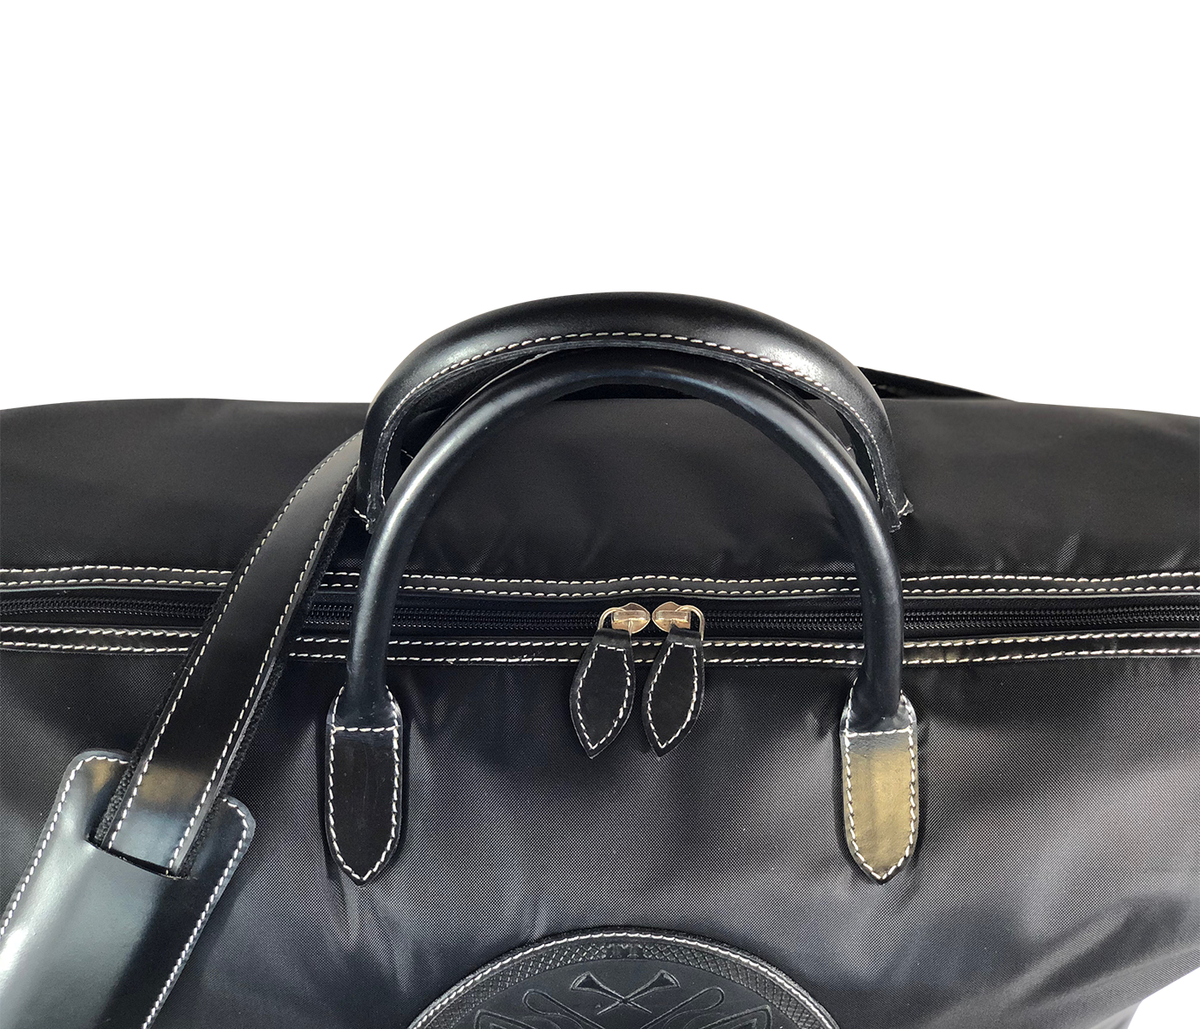 Tucker Tweed Leather Handbags The Tryon Travel Overnight: Foxhunting